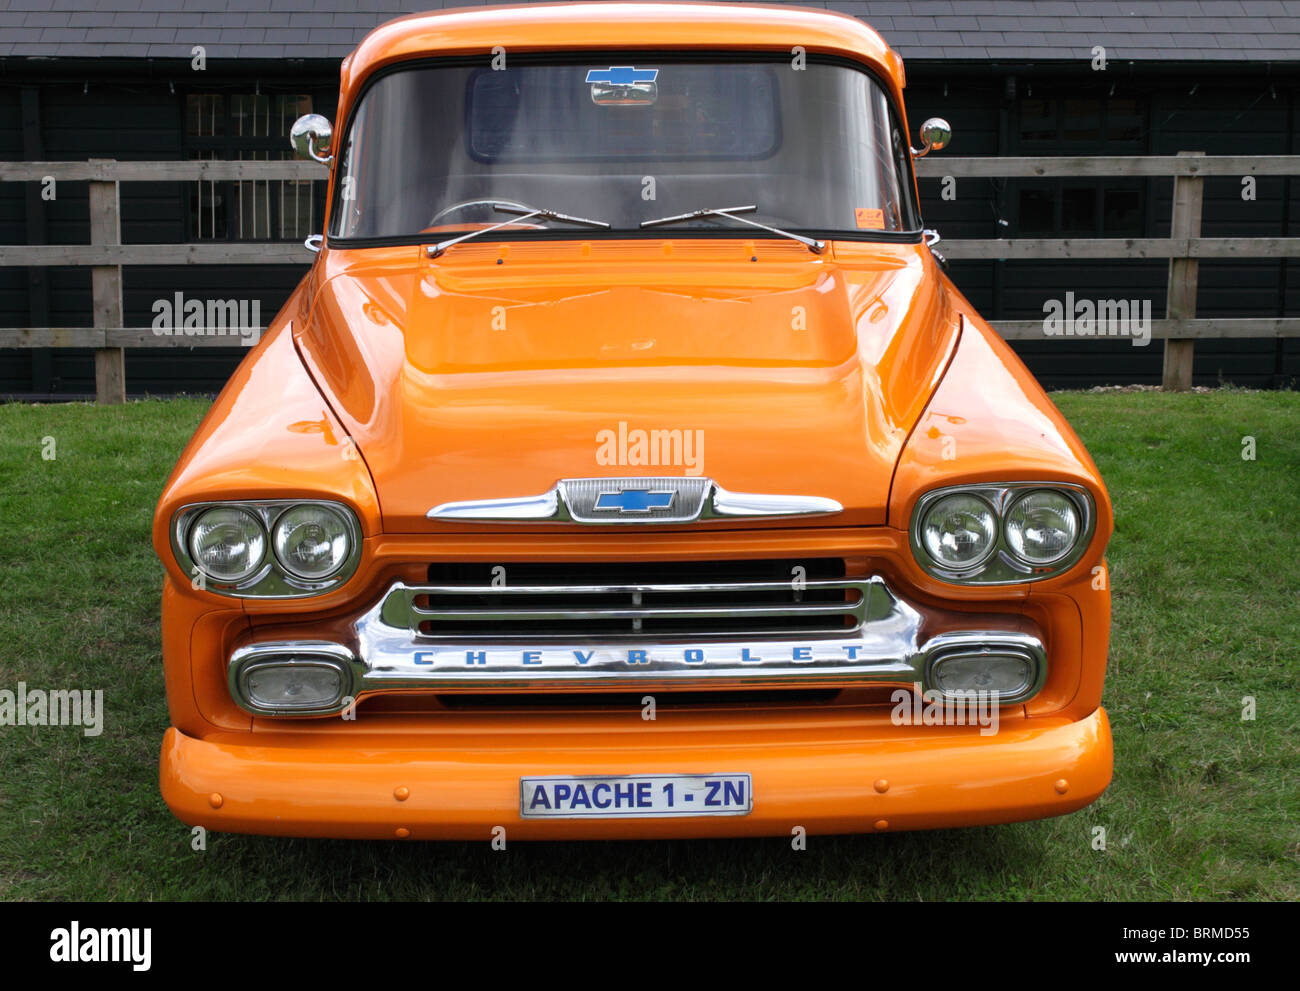 Chevrolet Apache pick up truck at Shire Horse Car Rally 2010 Stock Photo